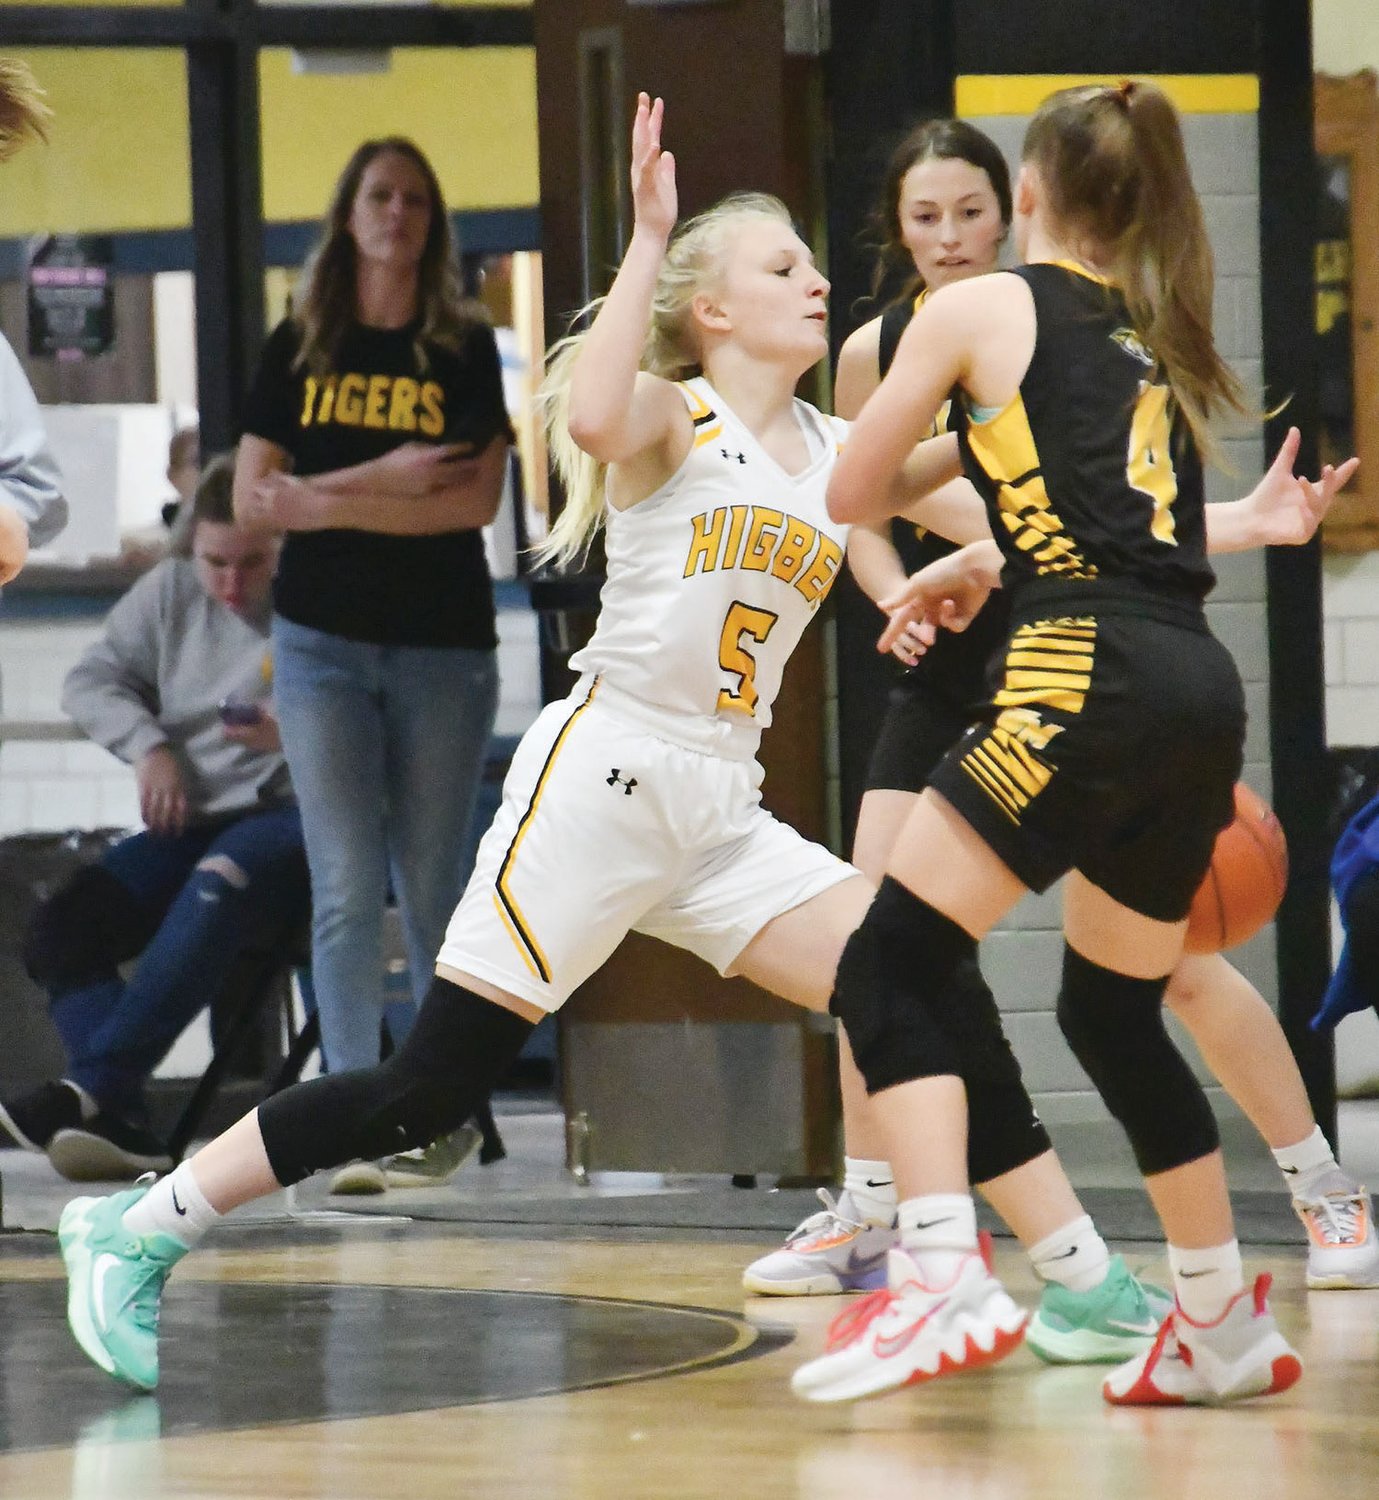 Higbee's Marilynn Ritter plays defense during the second half of the Keytesville Tournament girls championship.